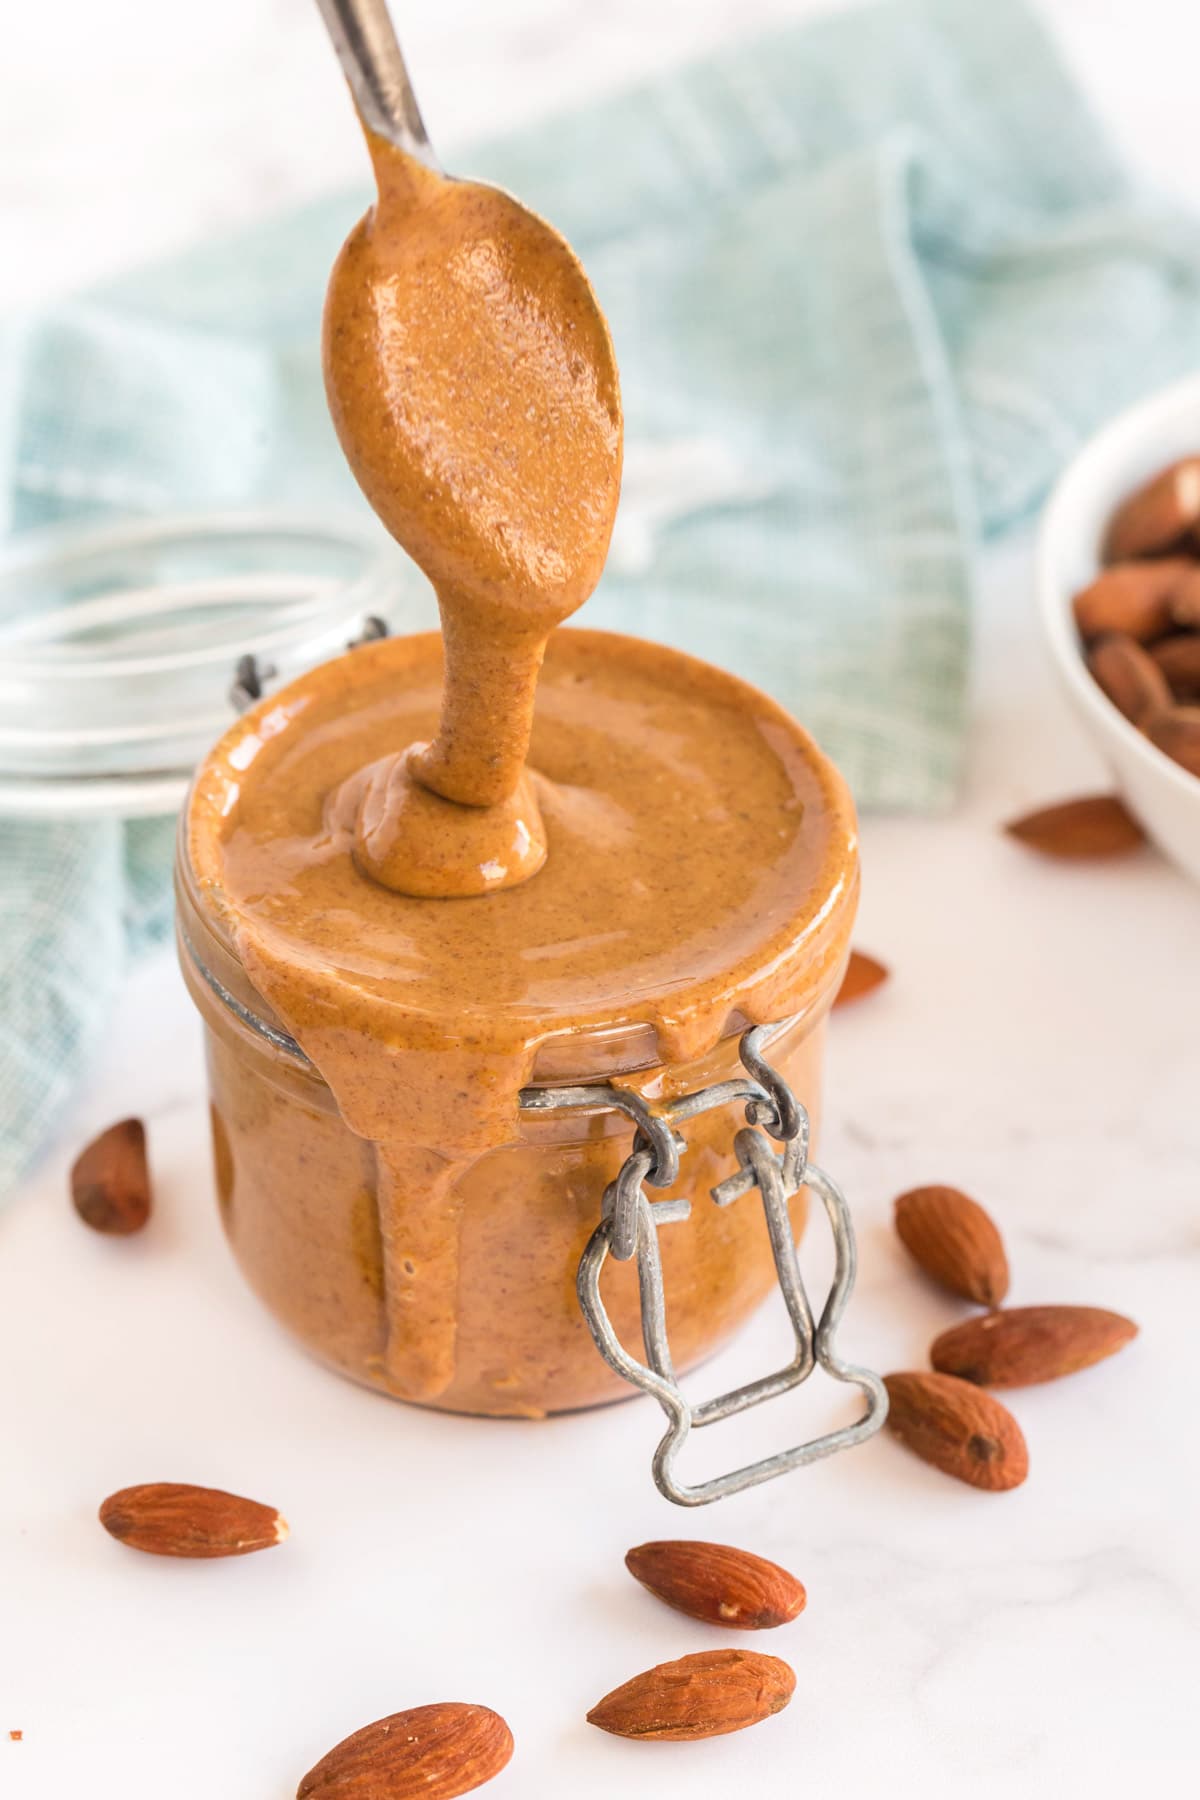 How to make Almond Butter